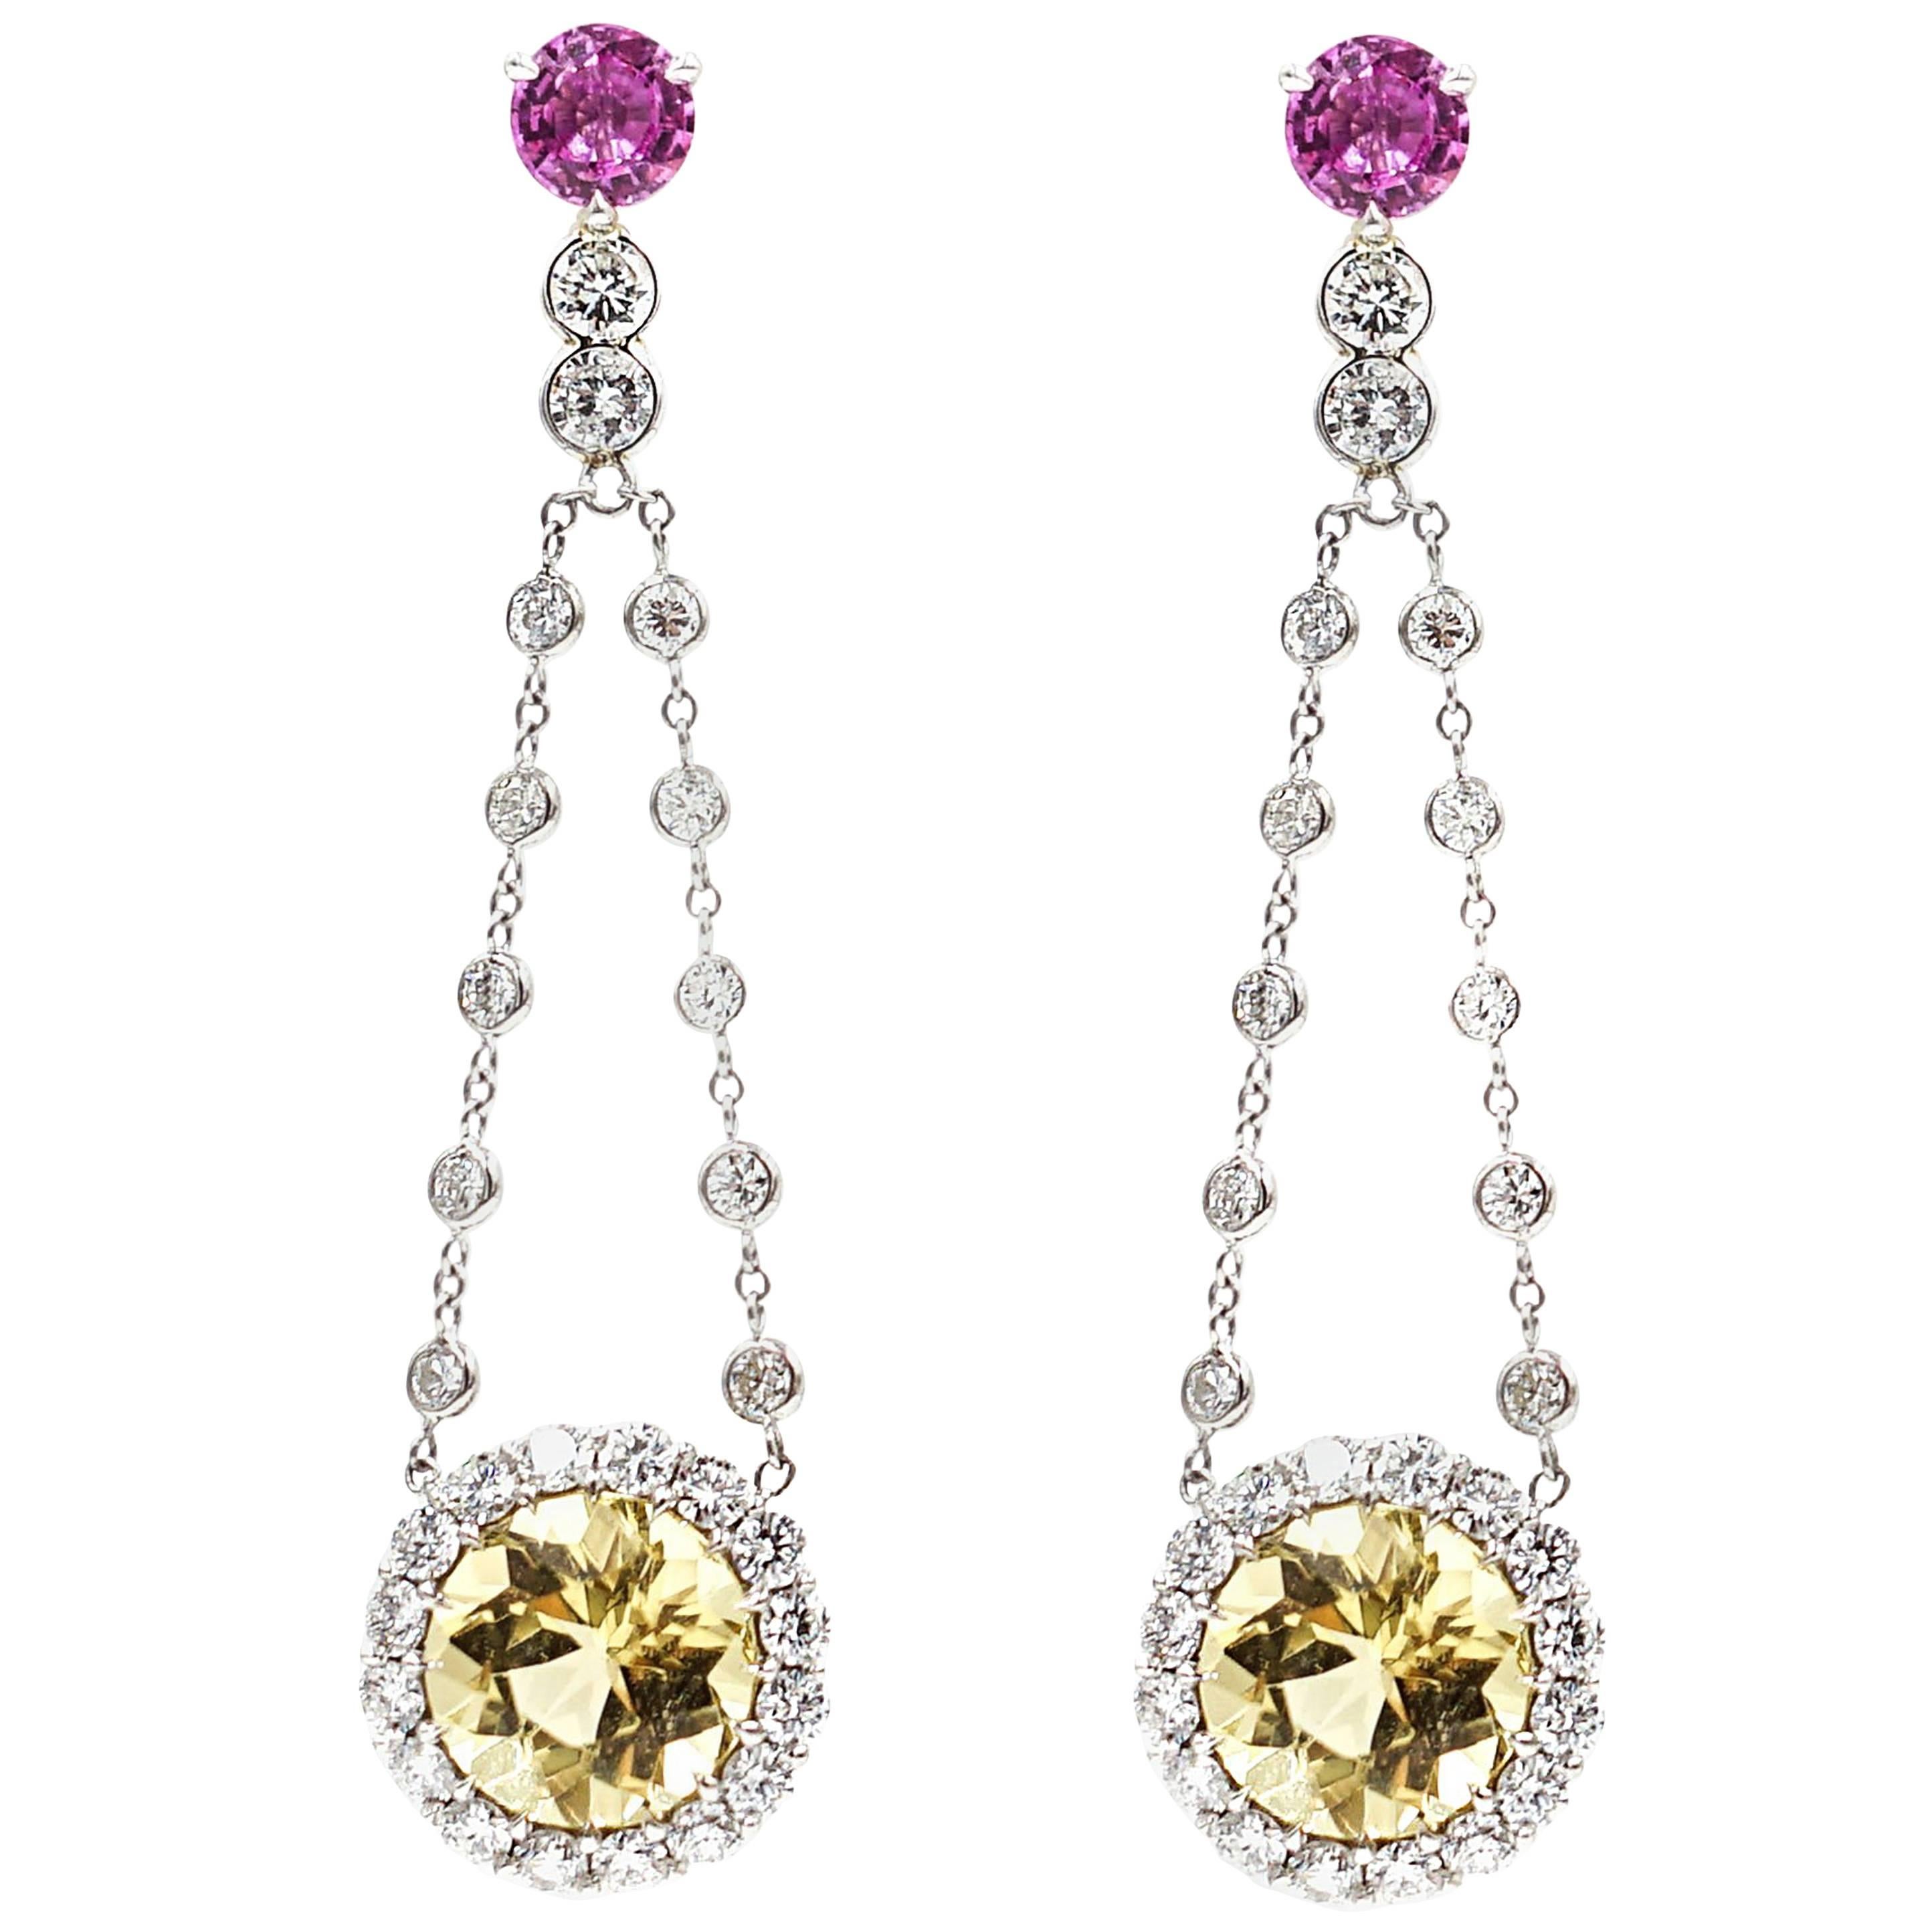 Pink Sapphire and Yellow Beryl Drop Earrings